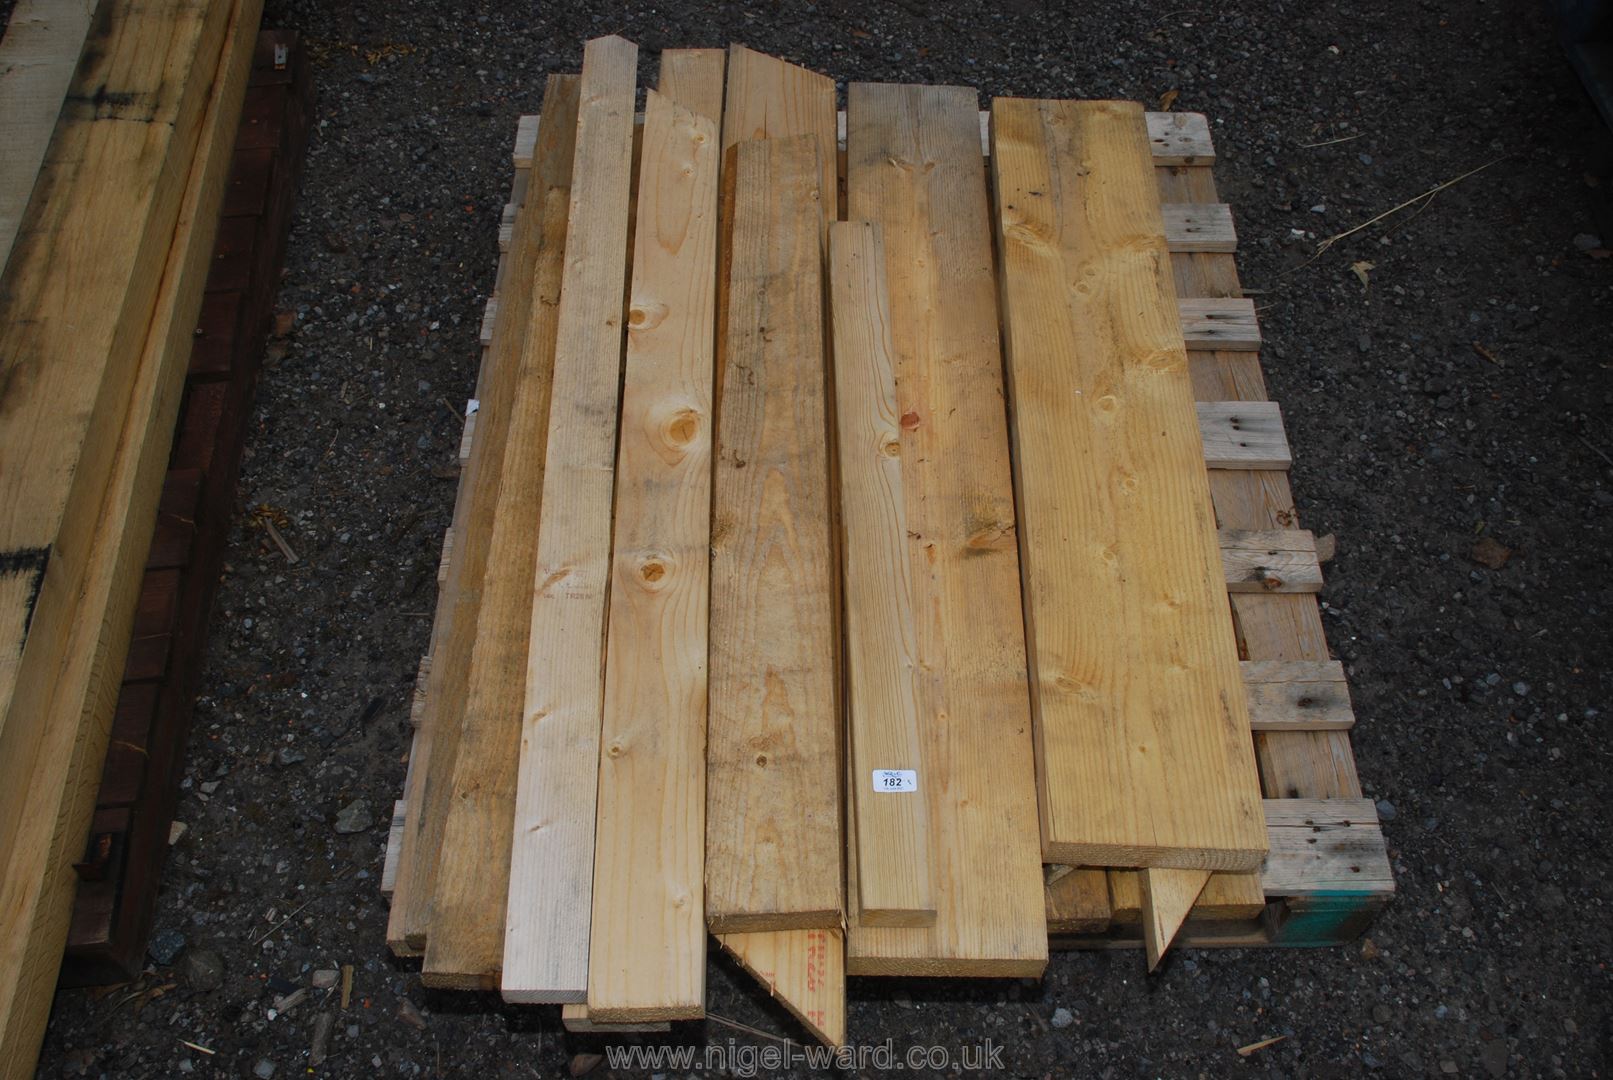 A pallet of various softwood timber, 3'' x 2'', 4'' x 2'' and 7 1/2'' x 2''.